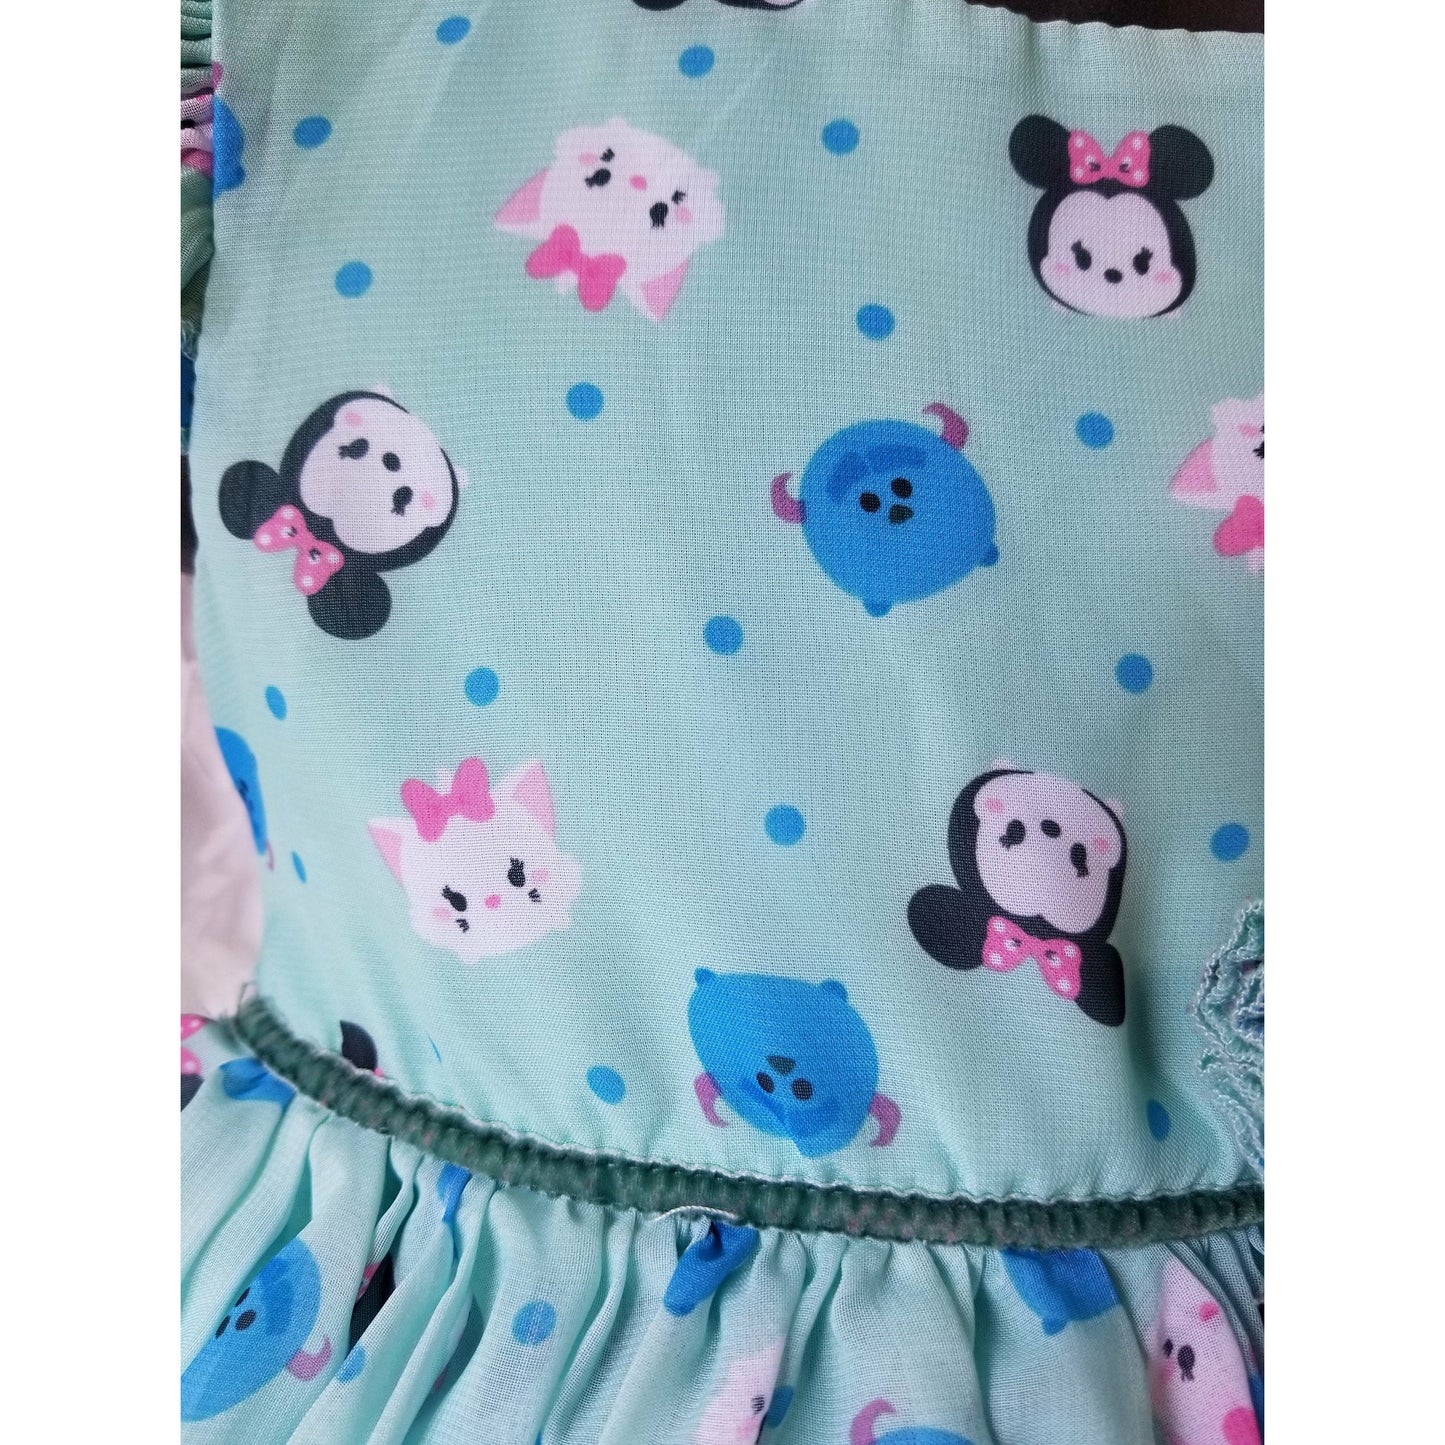 Disney Tsum Tsum Dress for Toddler Child or Large Doll ~ Size 2T ~ Chiffon Overlay ~ Cute!